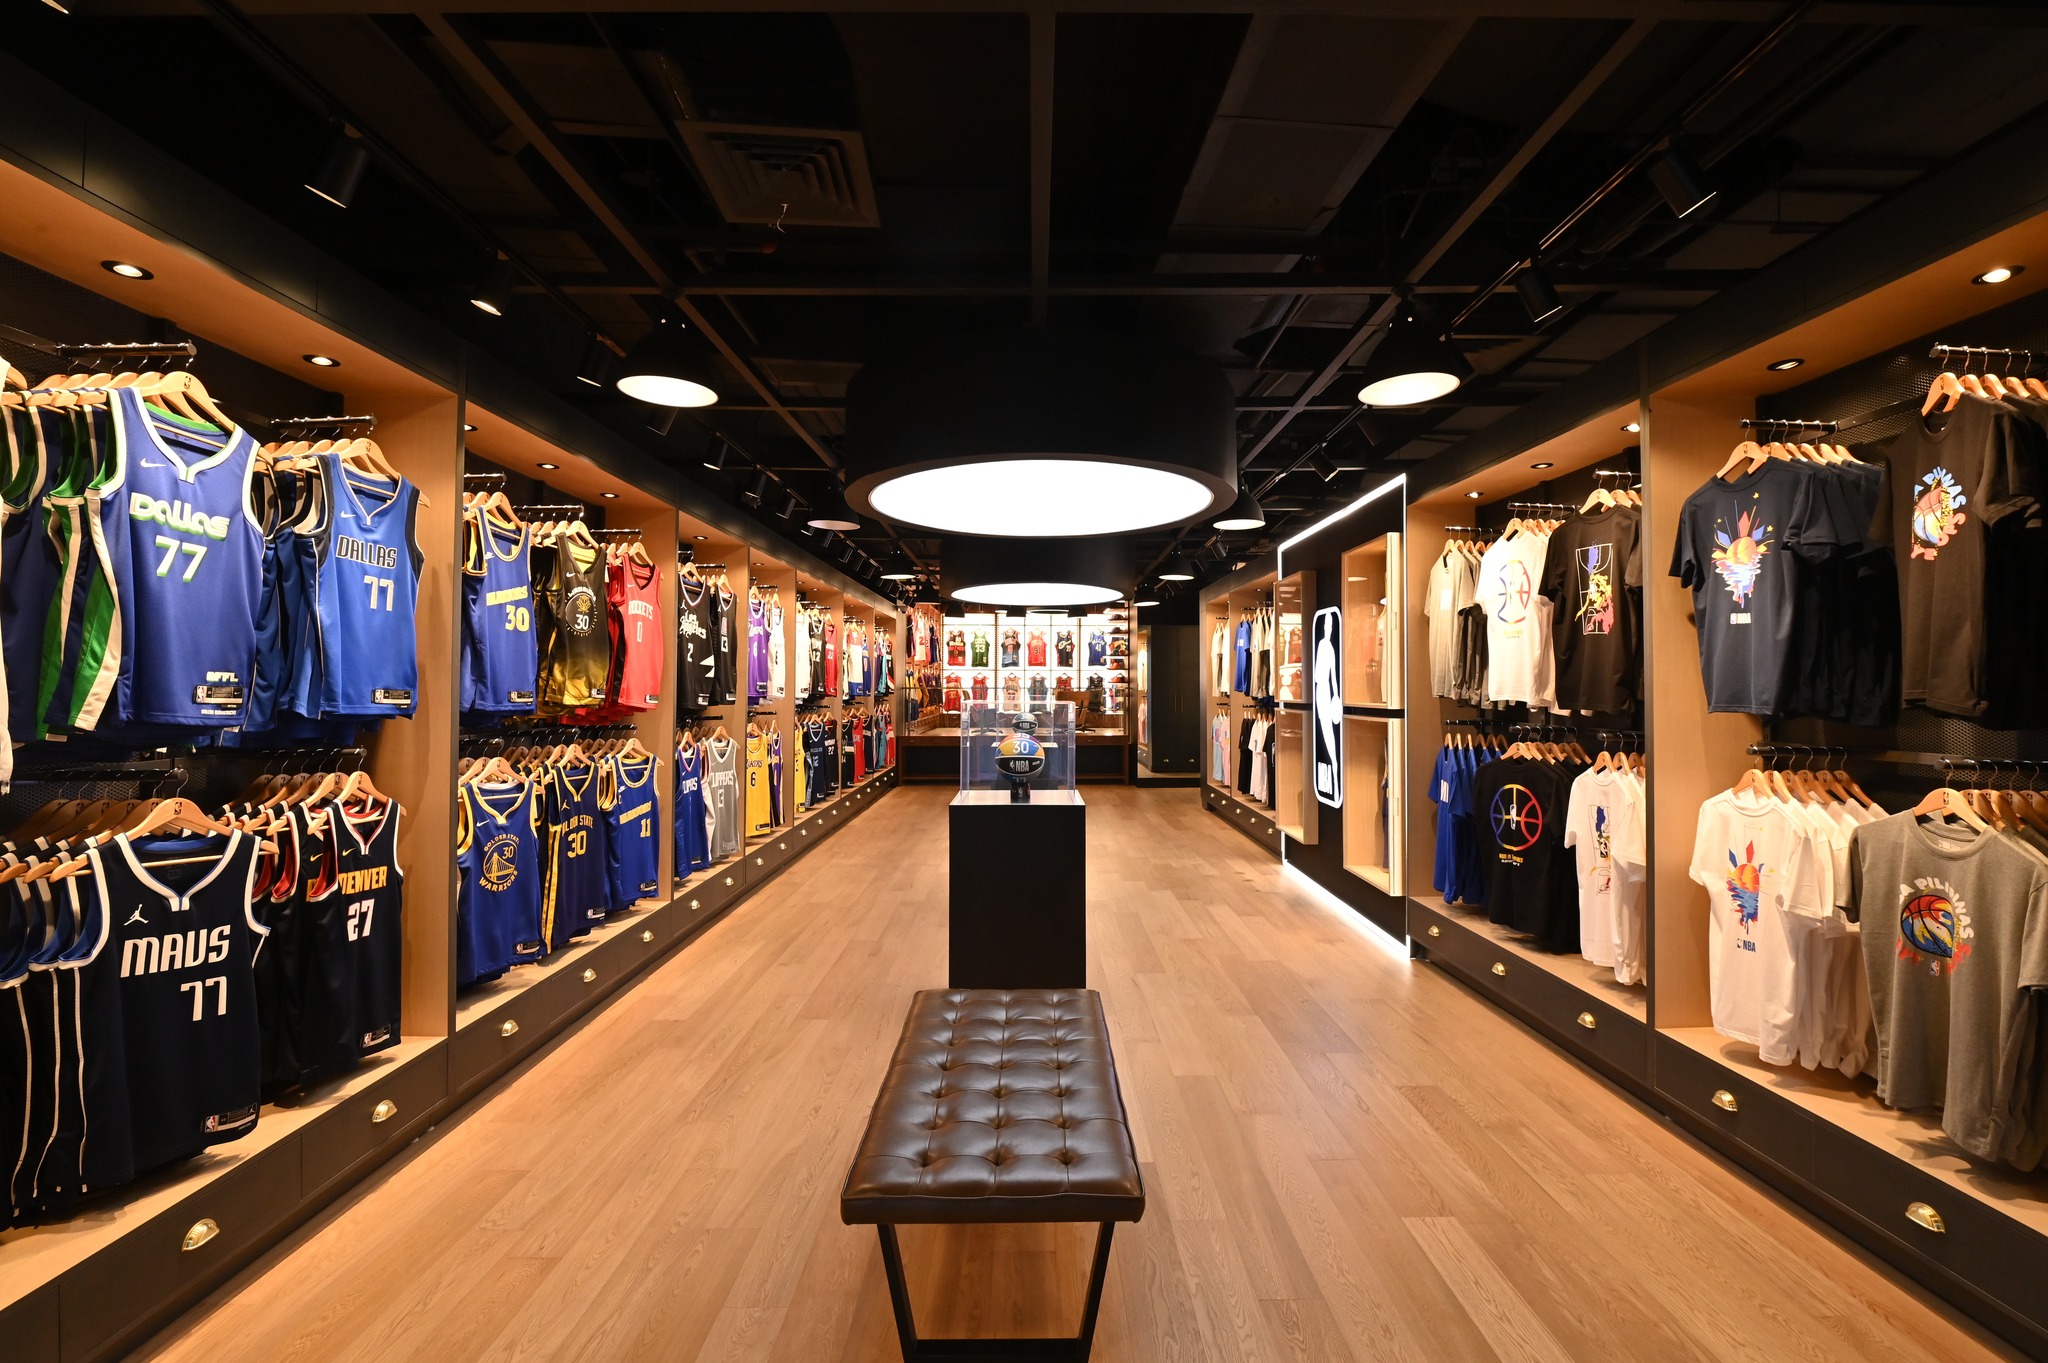 The new NBA store in the Philippines is the biggest one yet.